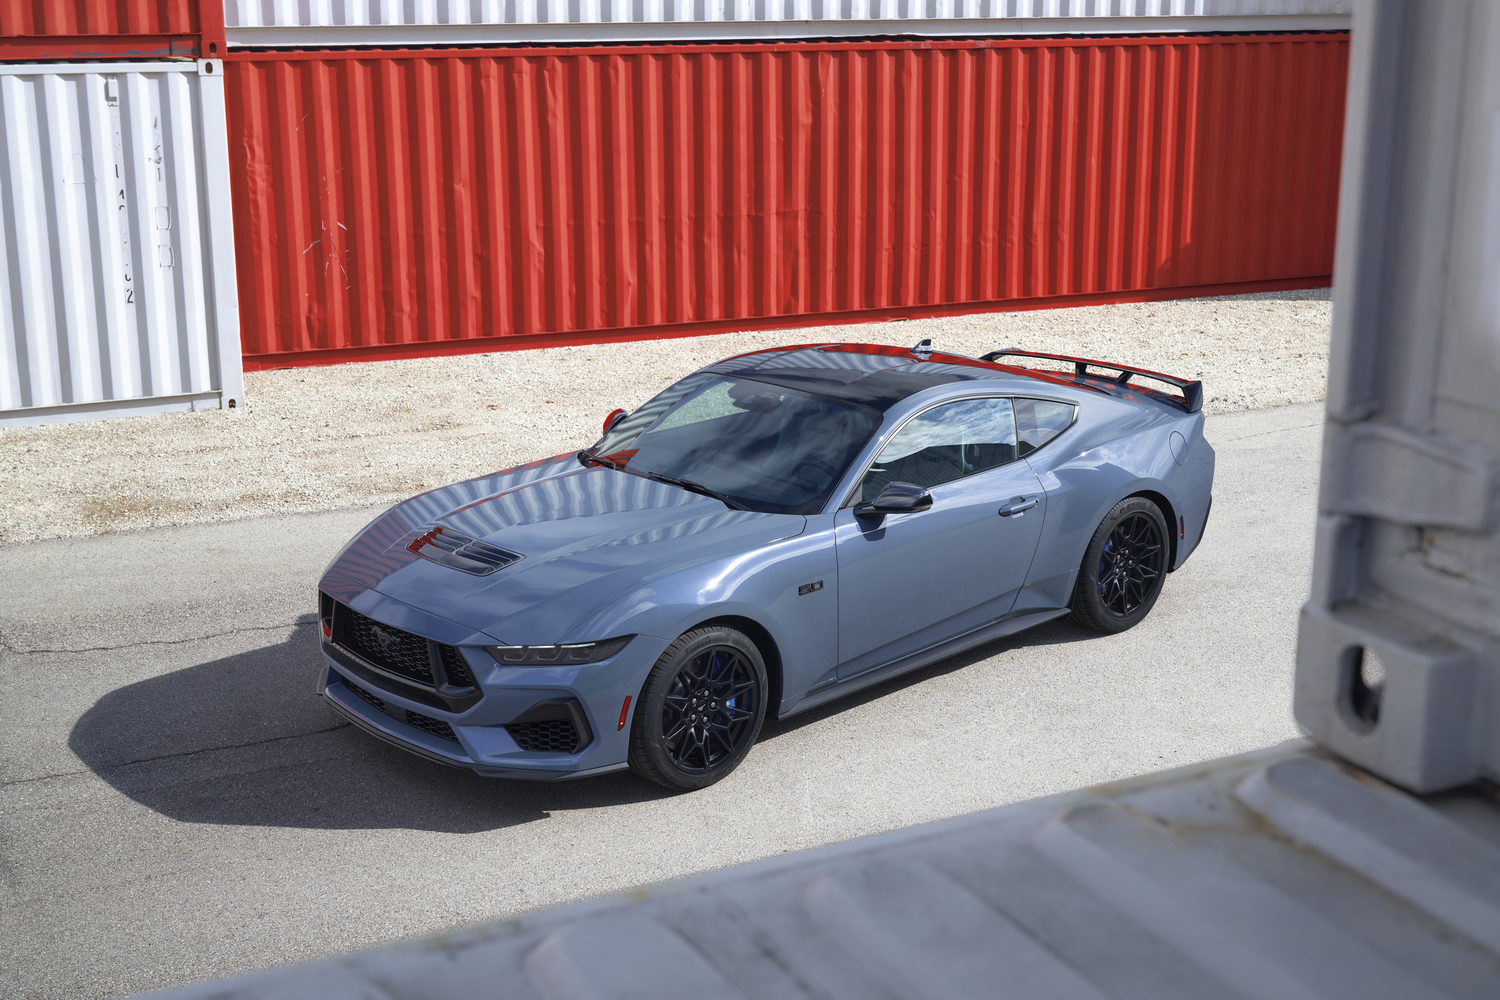 New Ford Mustang arrives next year